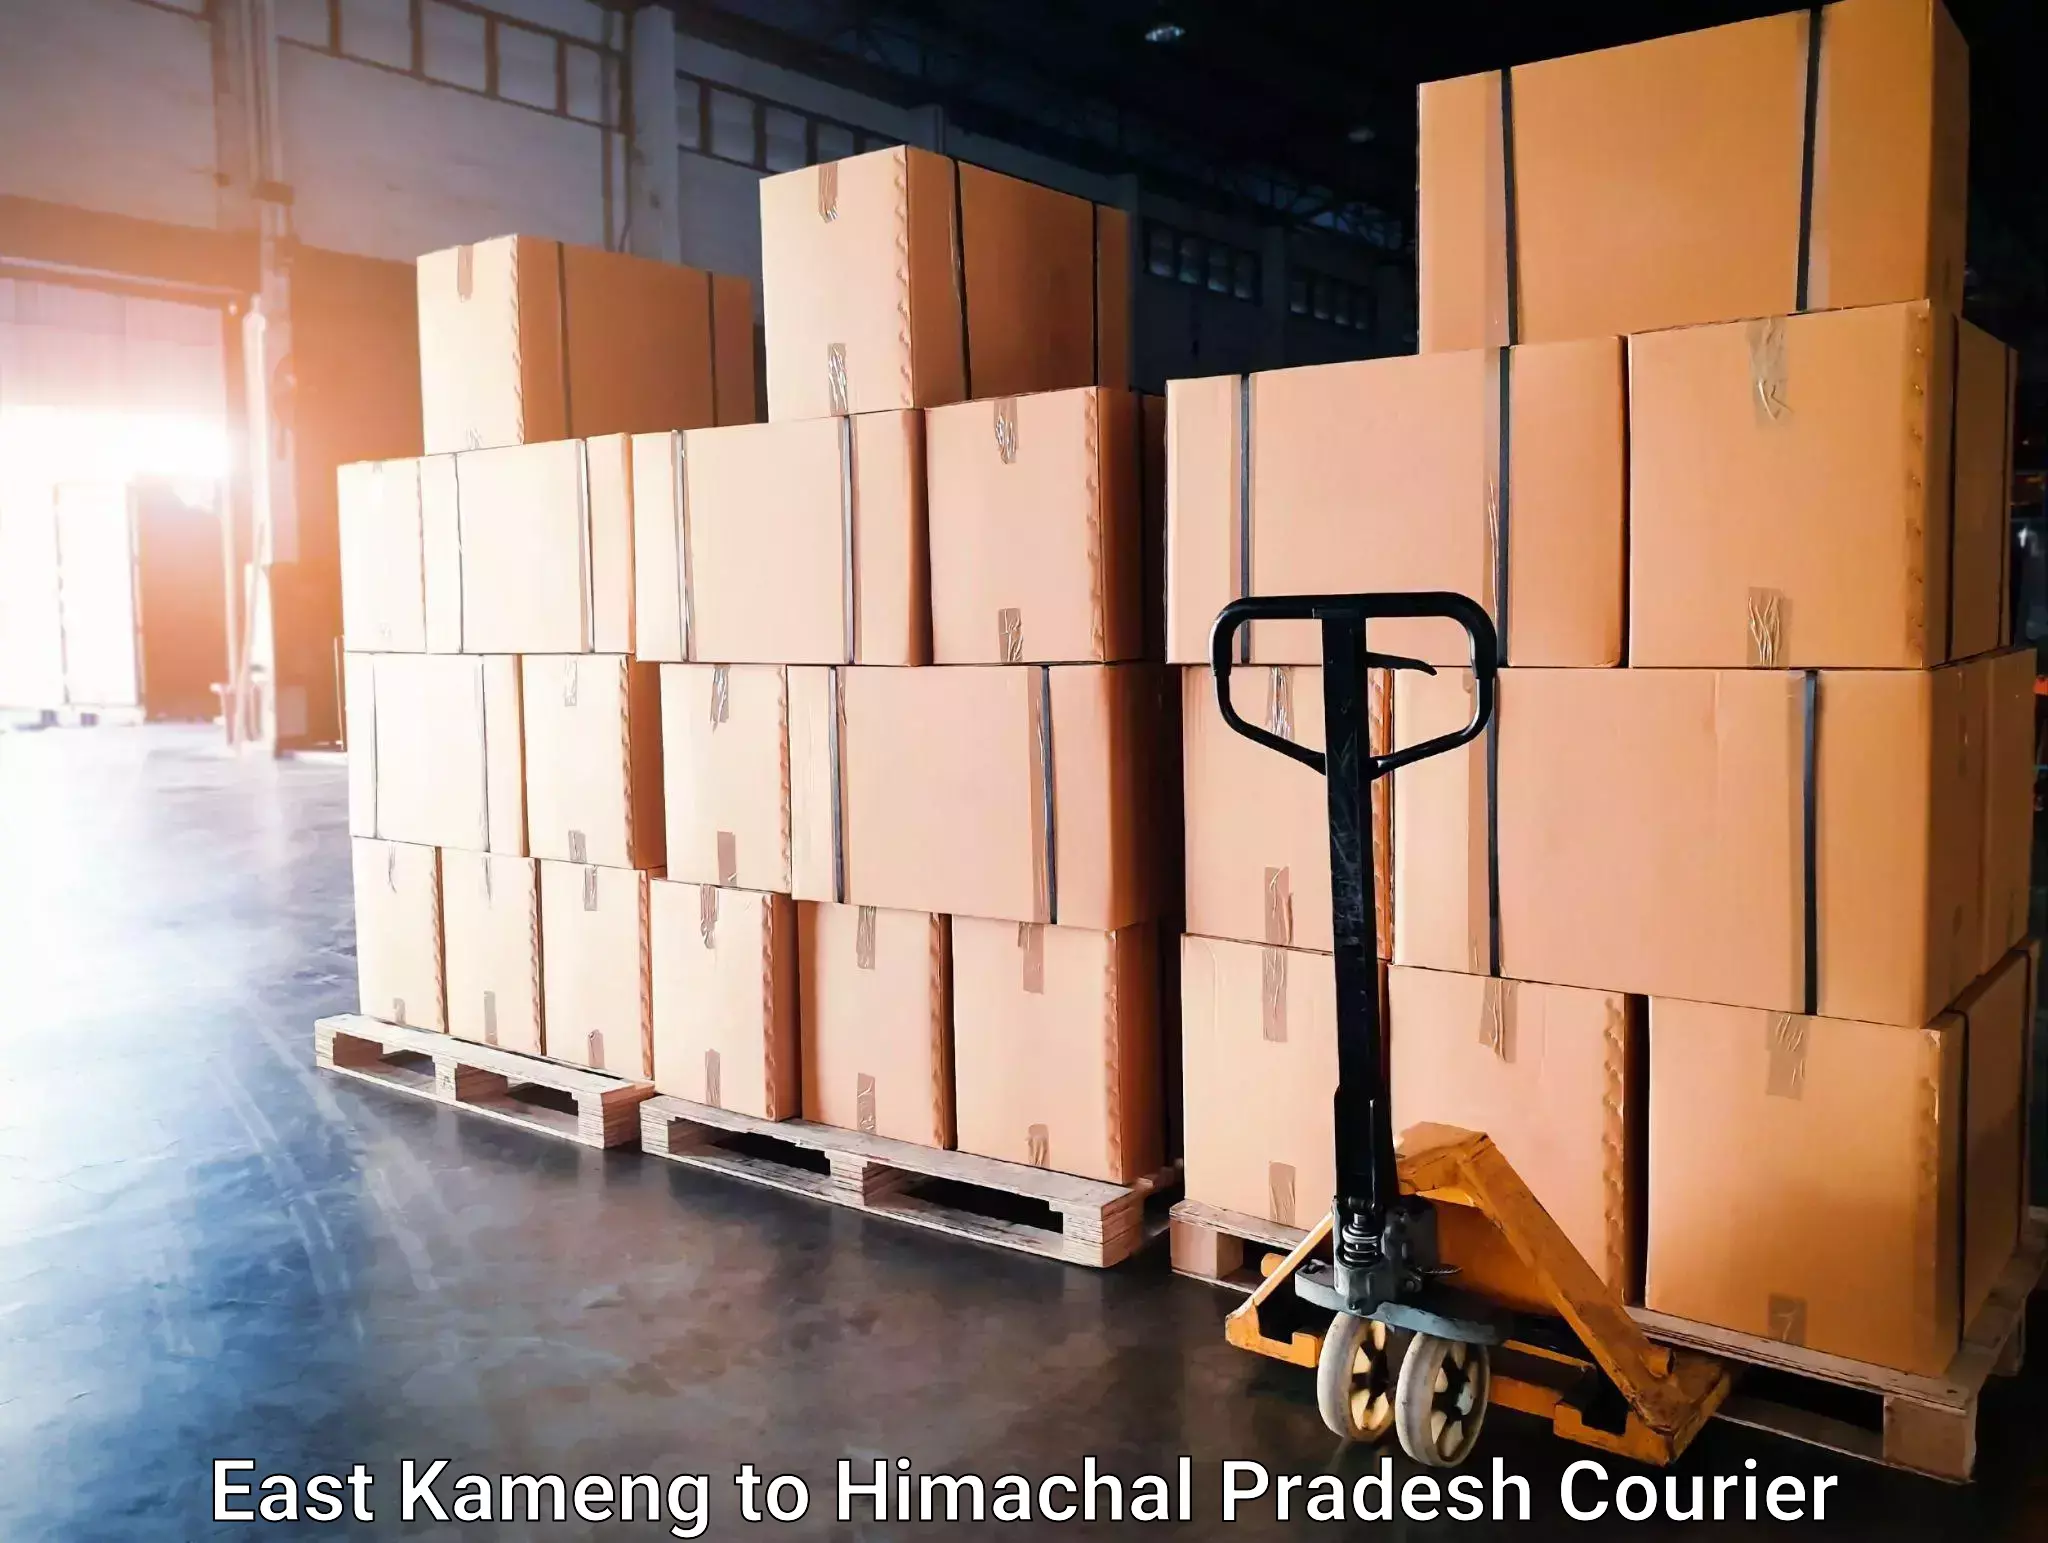 Courier service booking East Kameng to Himachal Pradesh